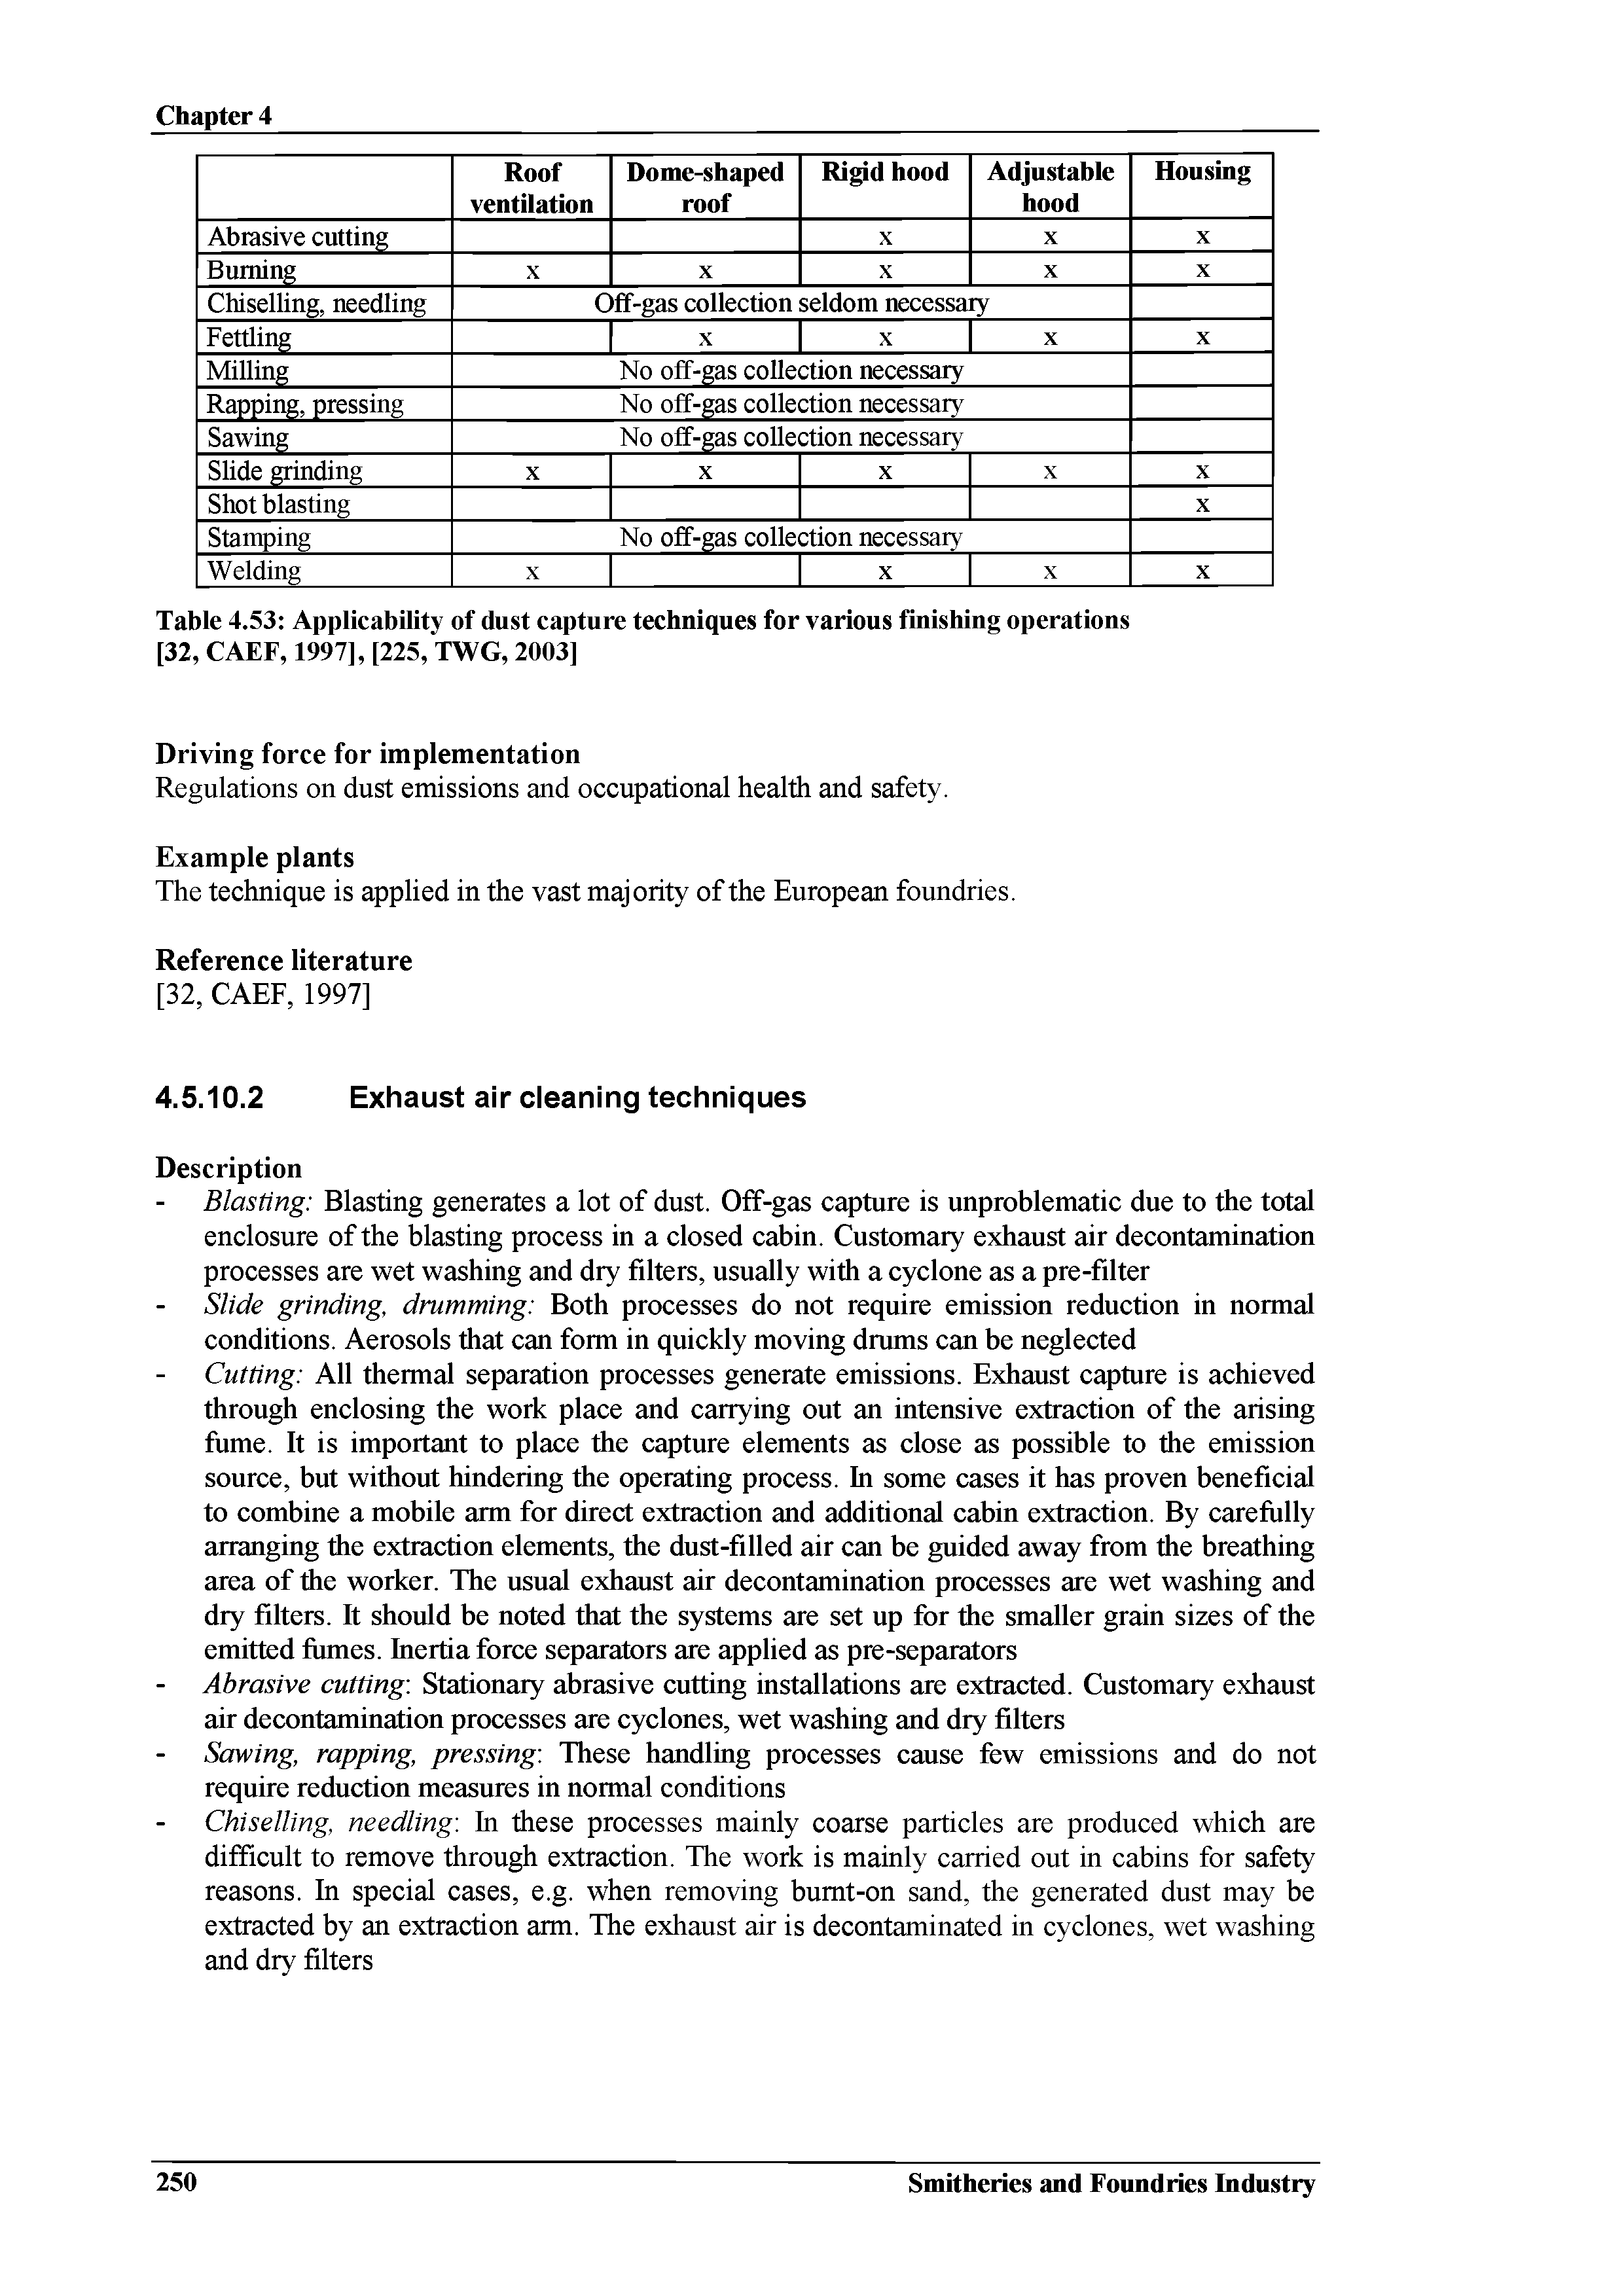 Table 4.53 Applicability of dust capture techniques for various finishing operations [32, CAEF, 1997], [225, TWG, 2003]...